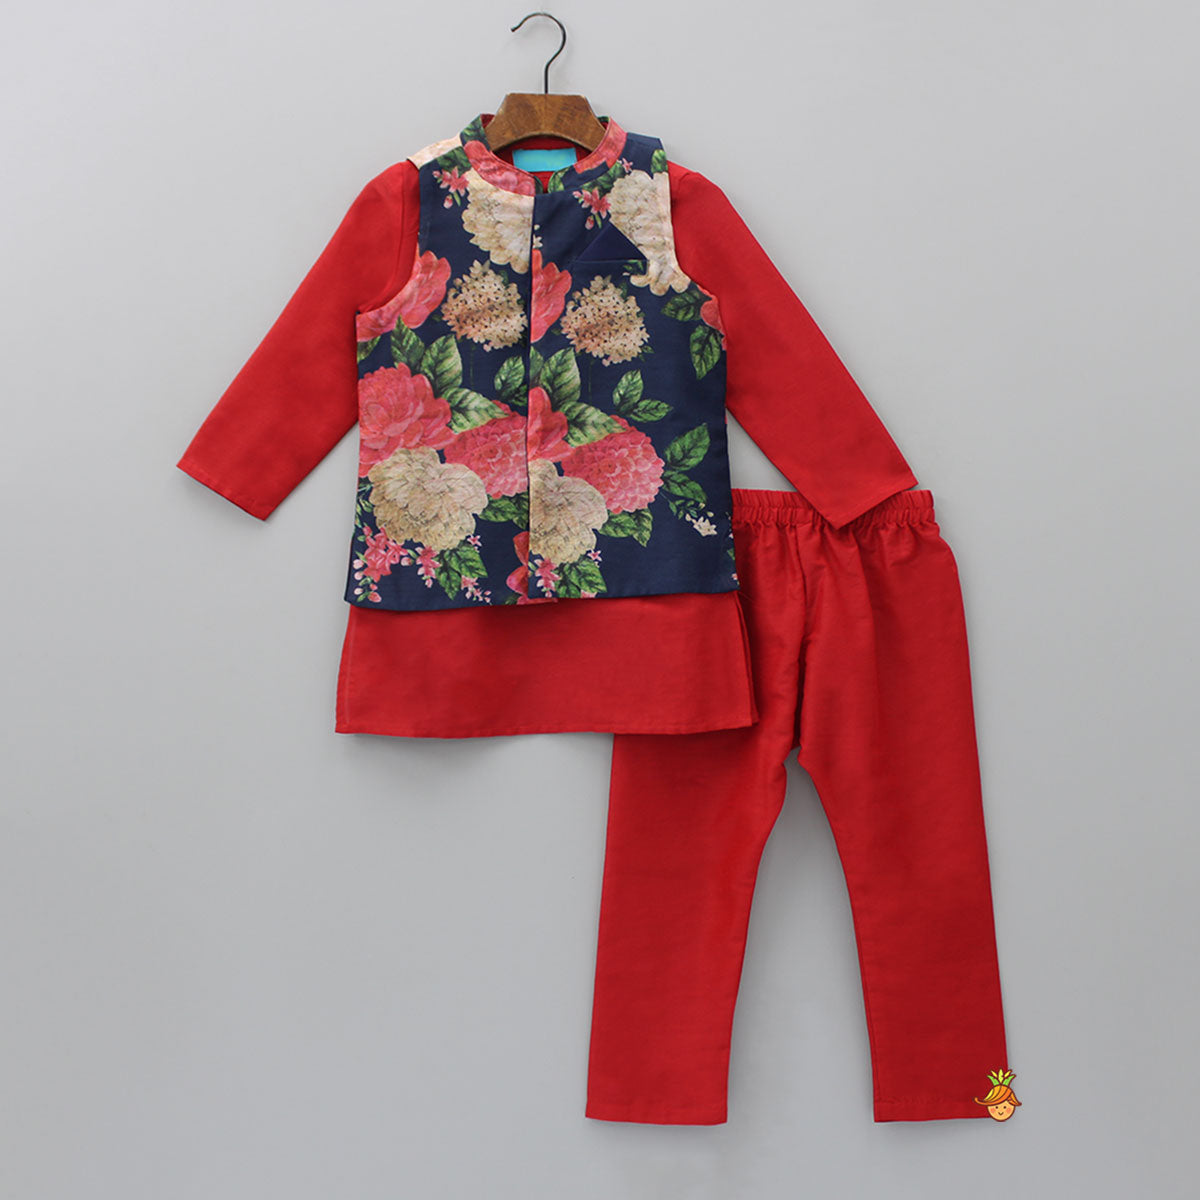 Ethnic Red Kurta And Floral Printed Jacket With Pyjama